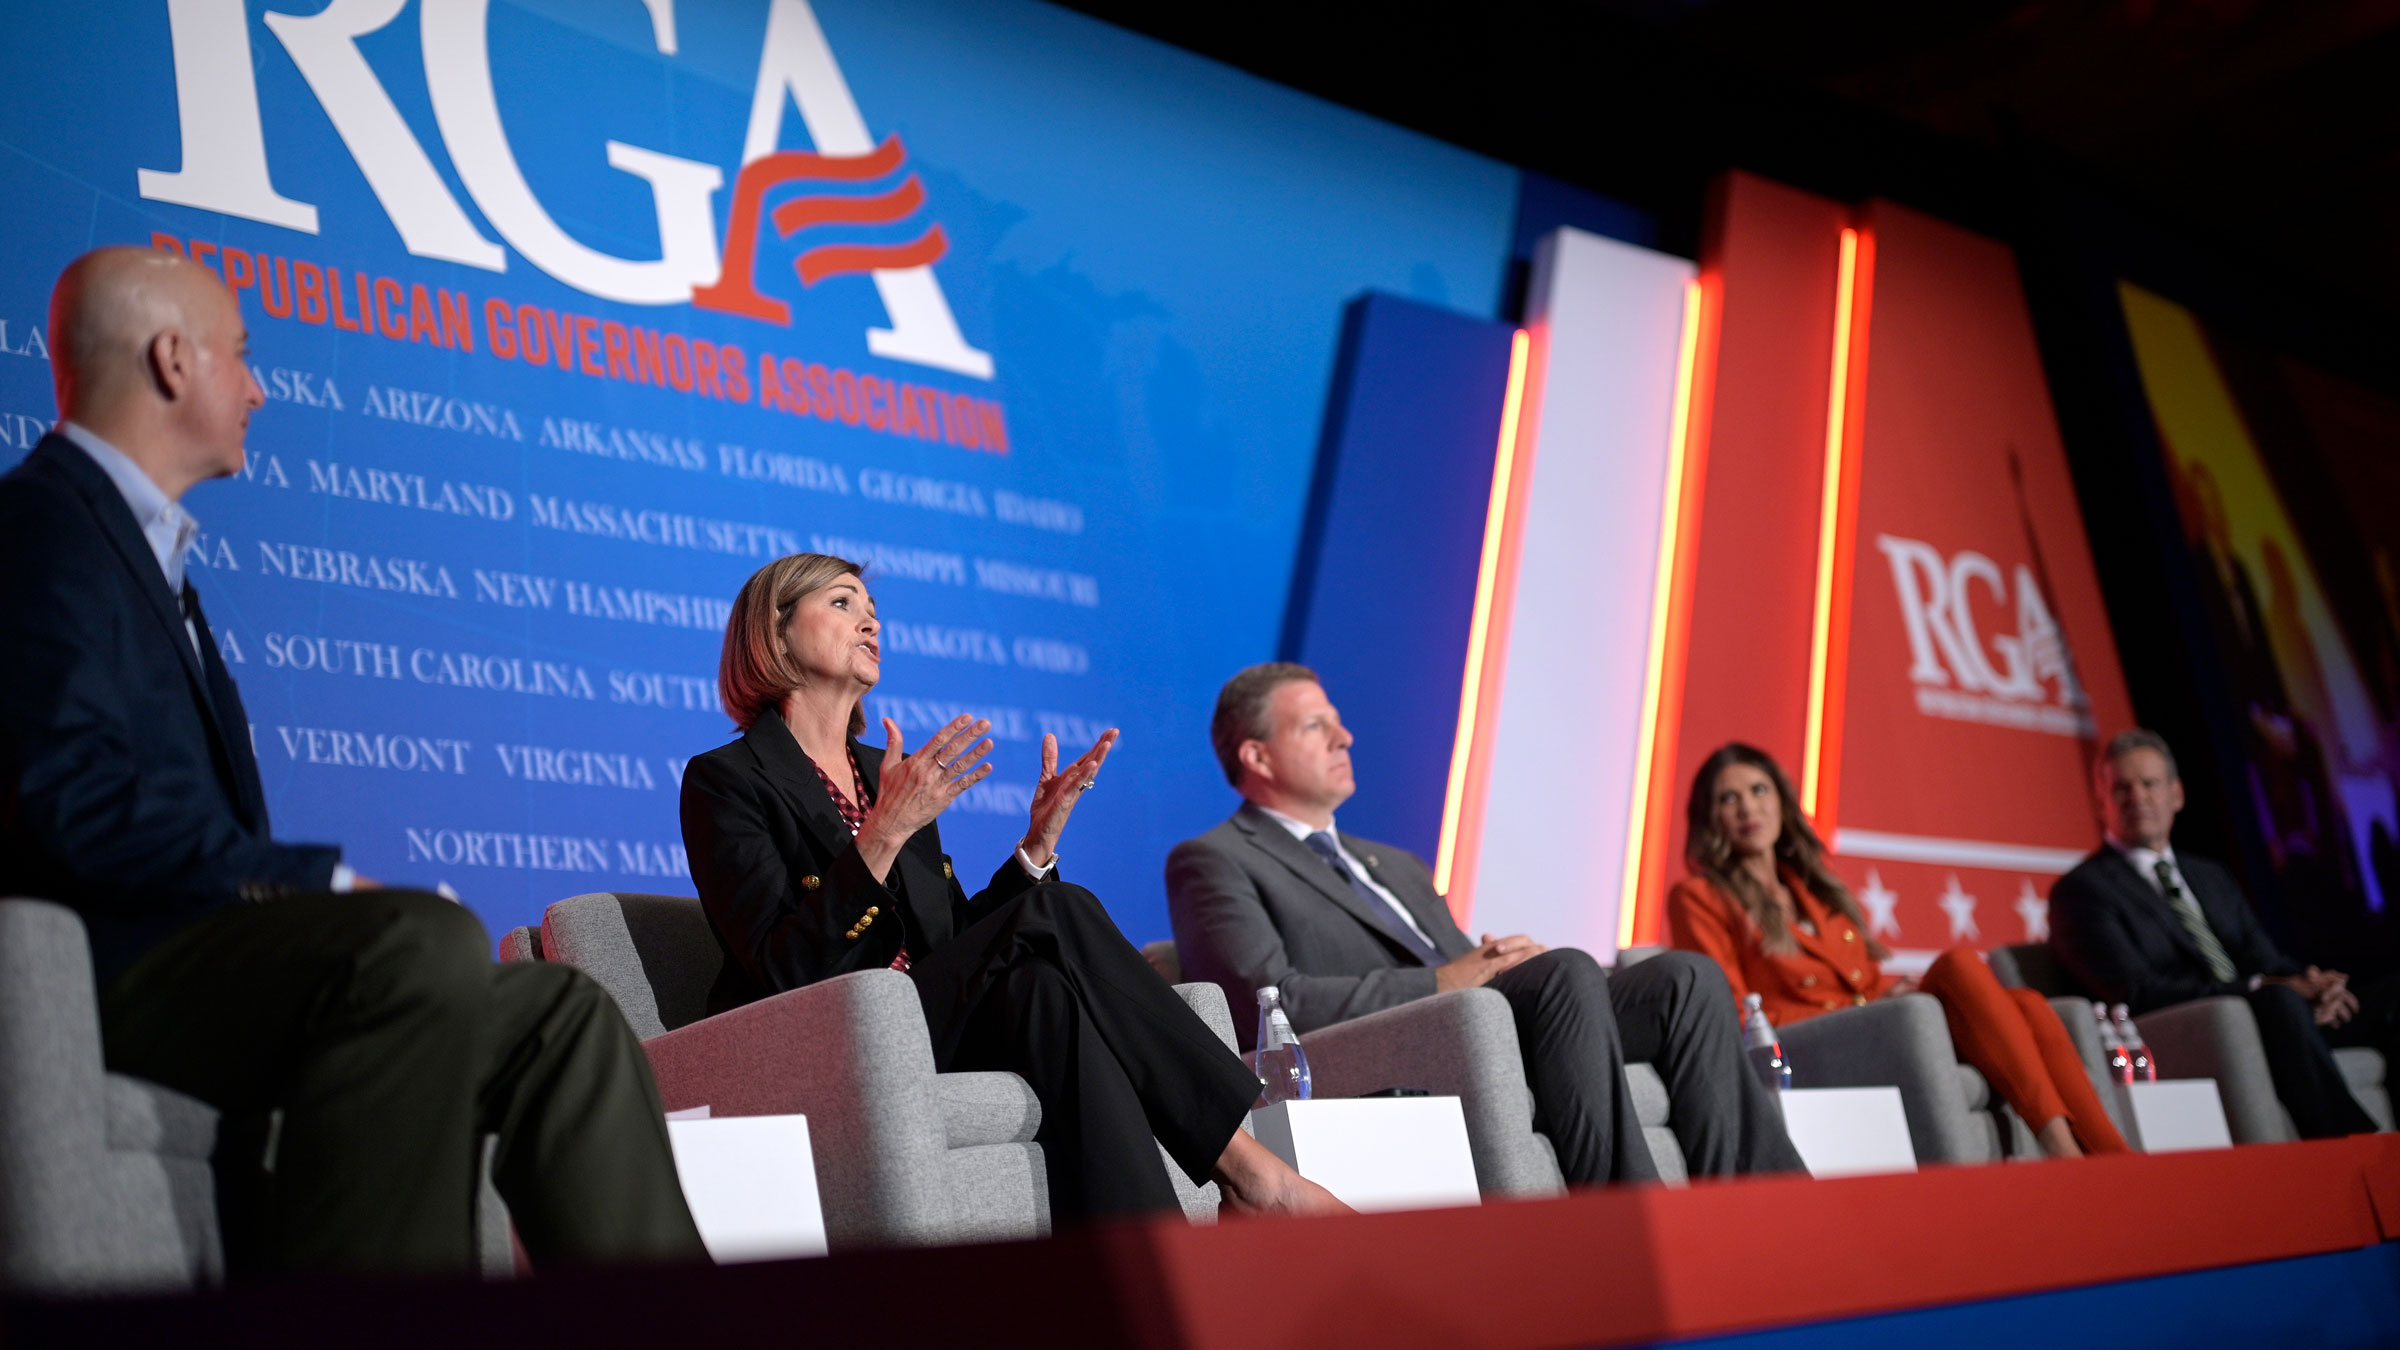 Iowa Gov. Kim Reynolds, second from left, answers a question Tuesday during a panel discussion that was held at a Republican Governors Association conference in Orlando. With her, from left, are Nebraska Gov. Pete Ricketts, New Hampshire Gov. Chris Sununu, South Dakota Gov. Kristi Noem and Tennessee Gov. Bill Lee.